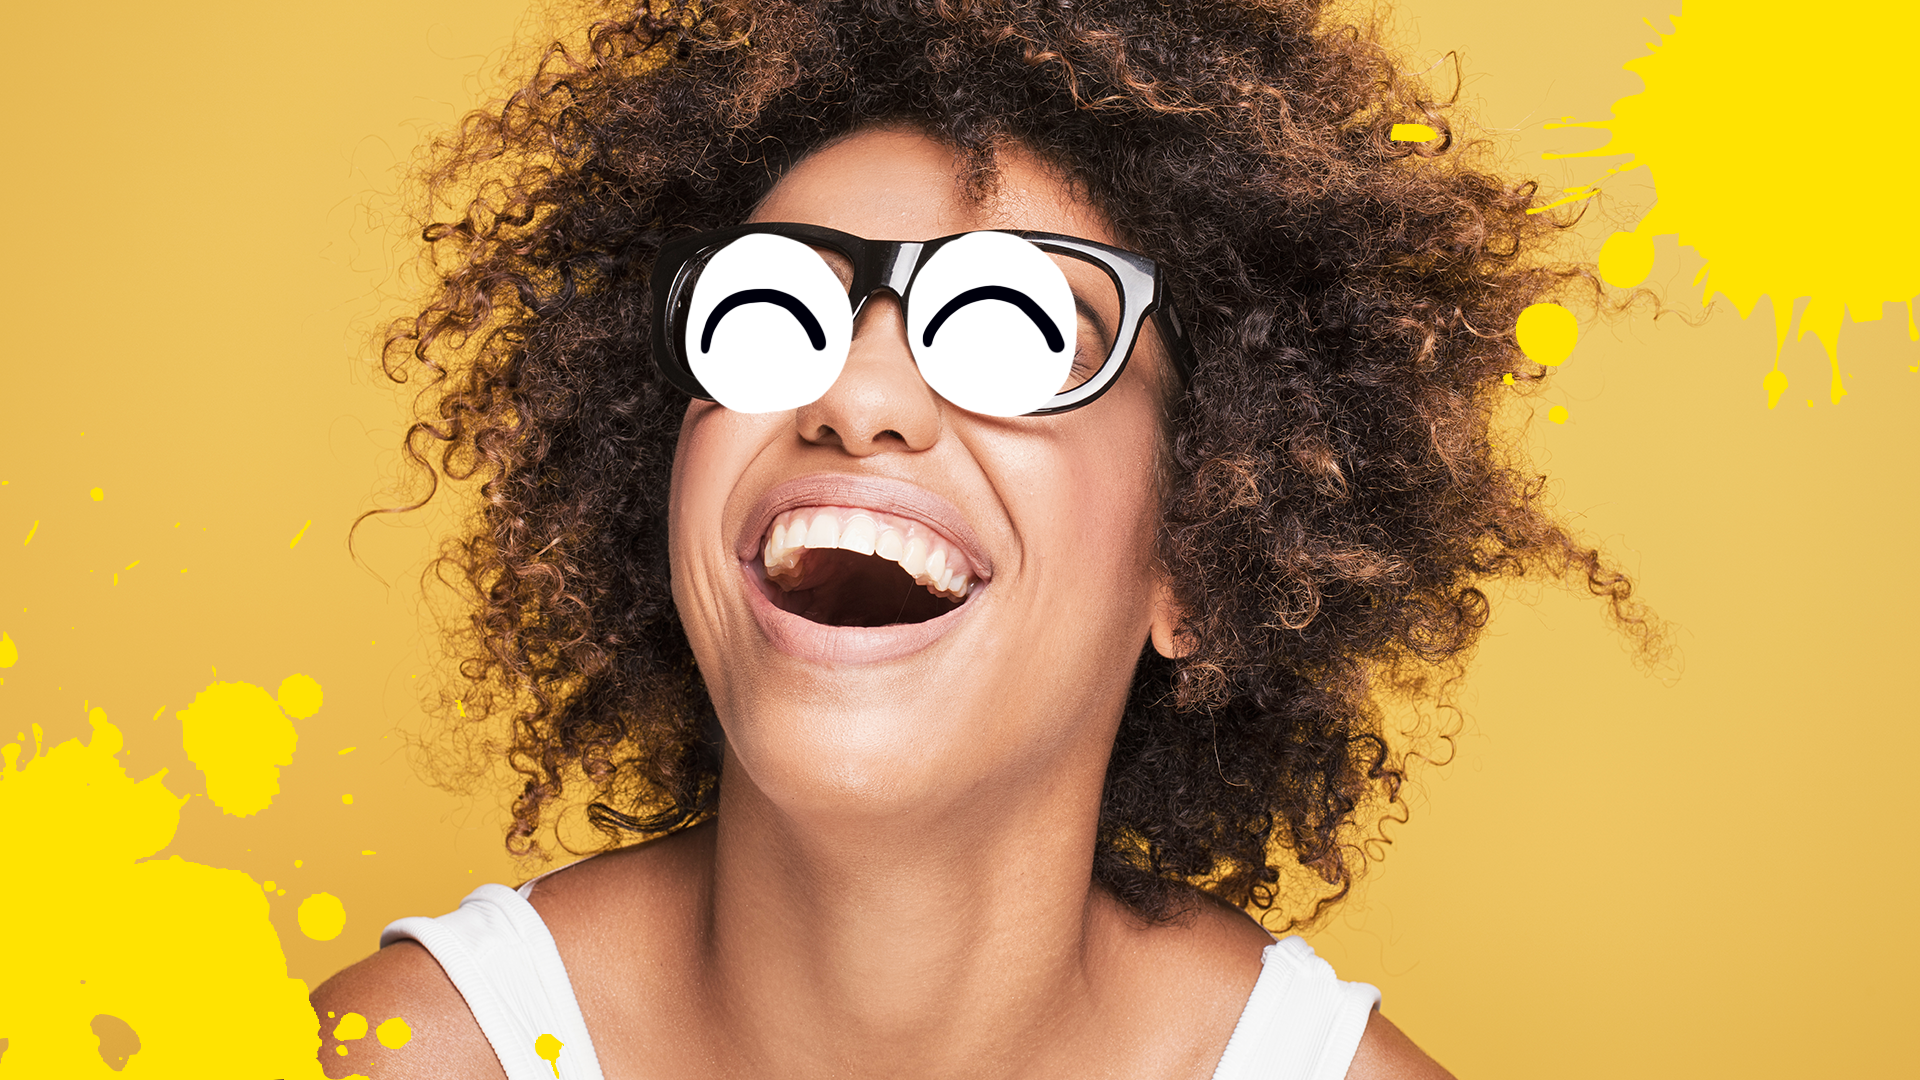 Woman laughing on orange background with splats